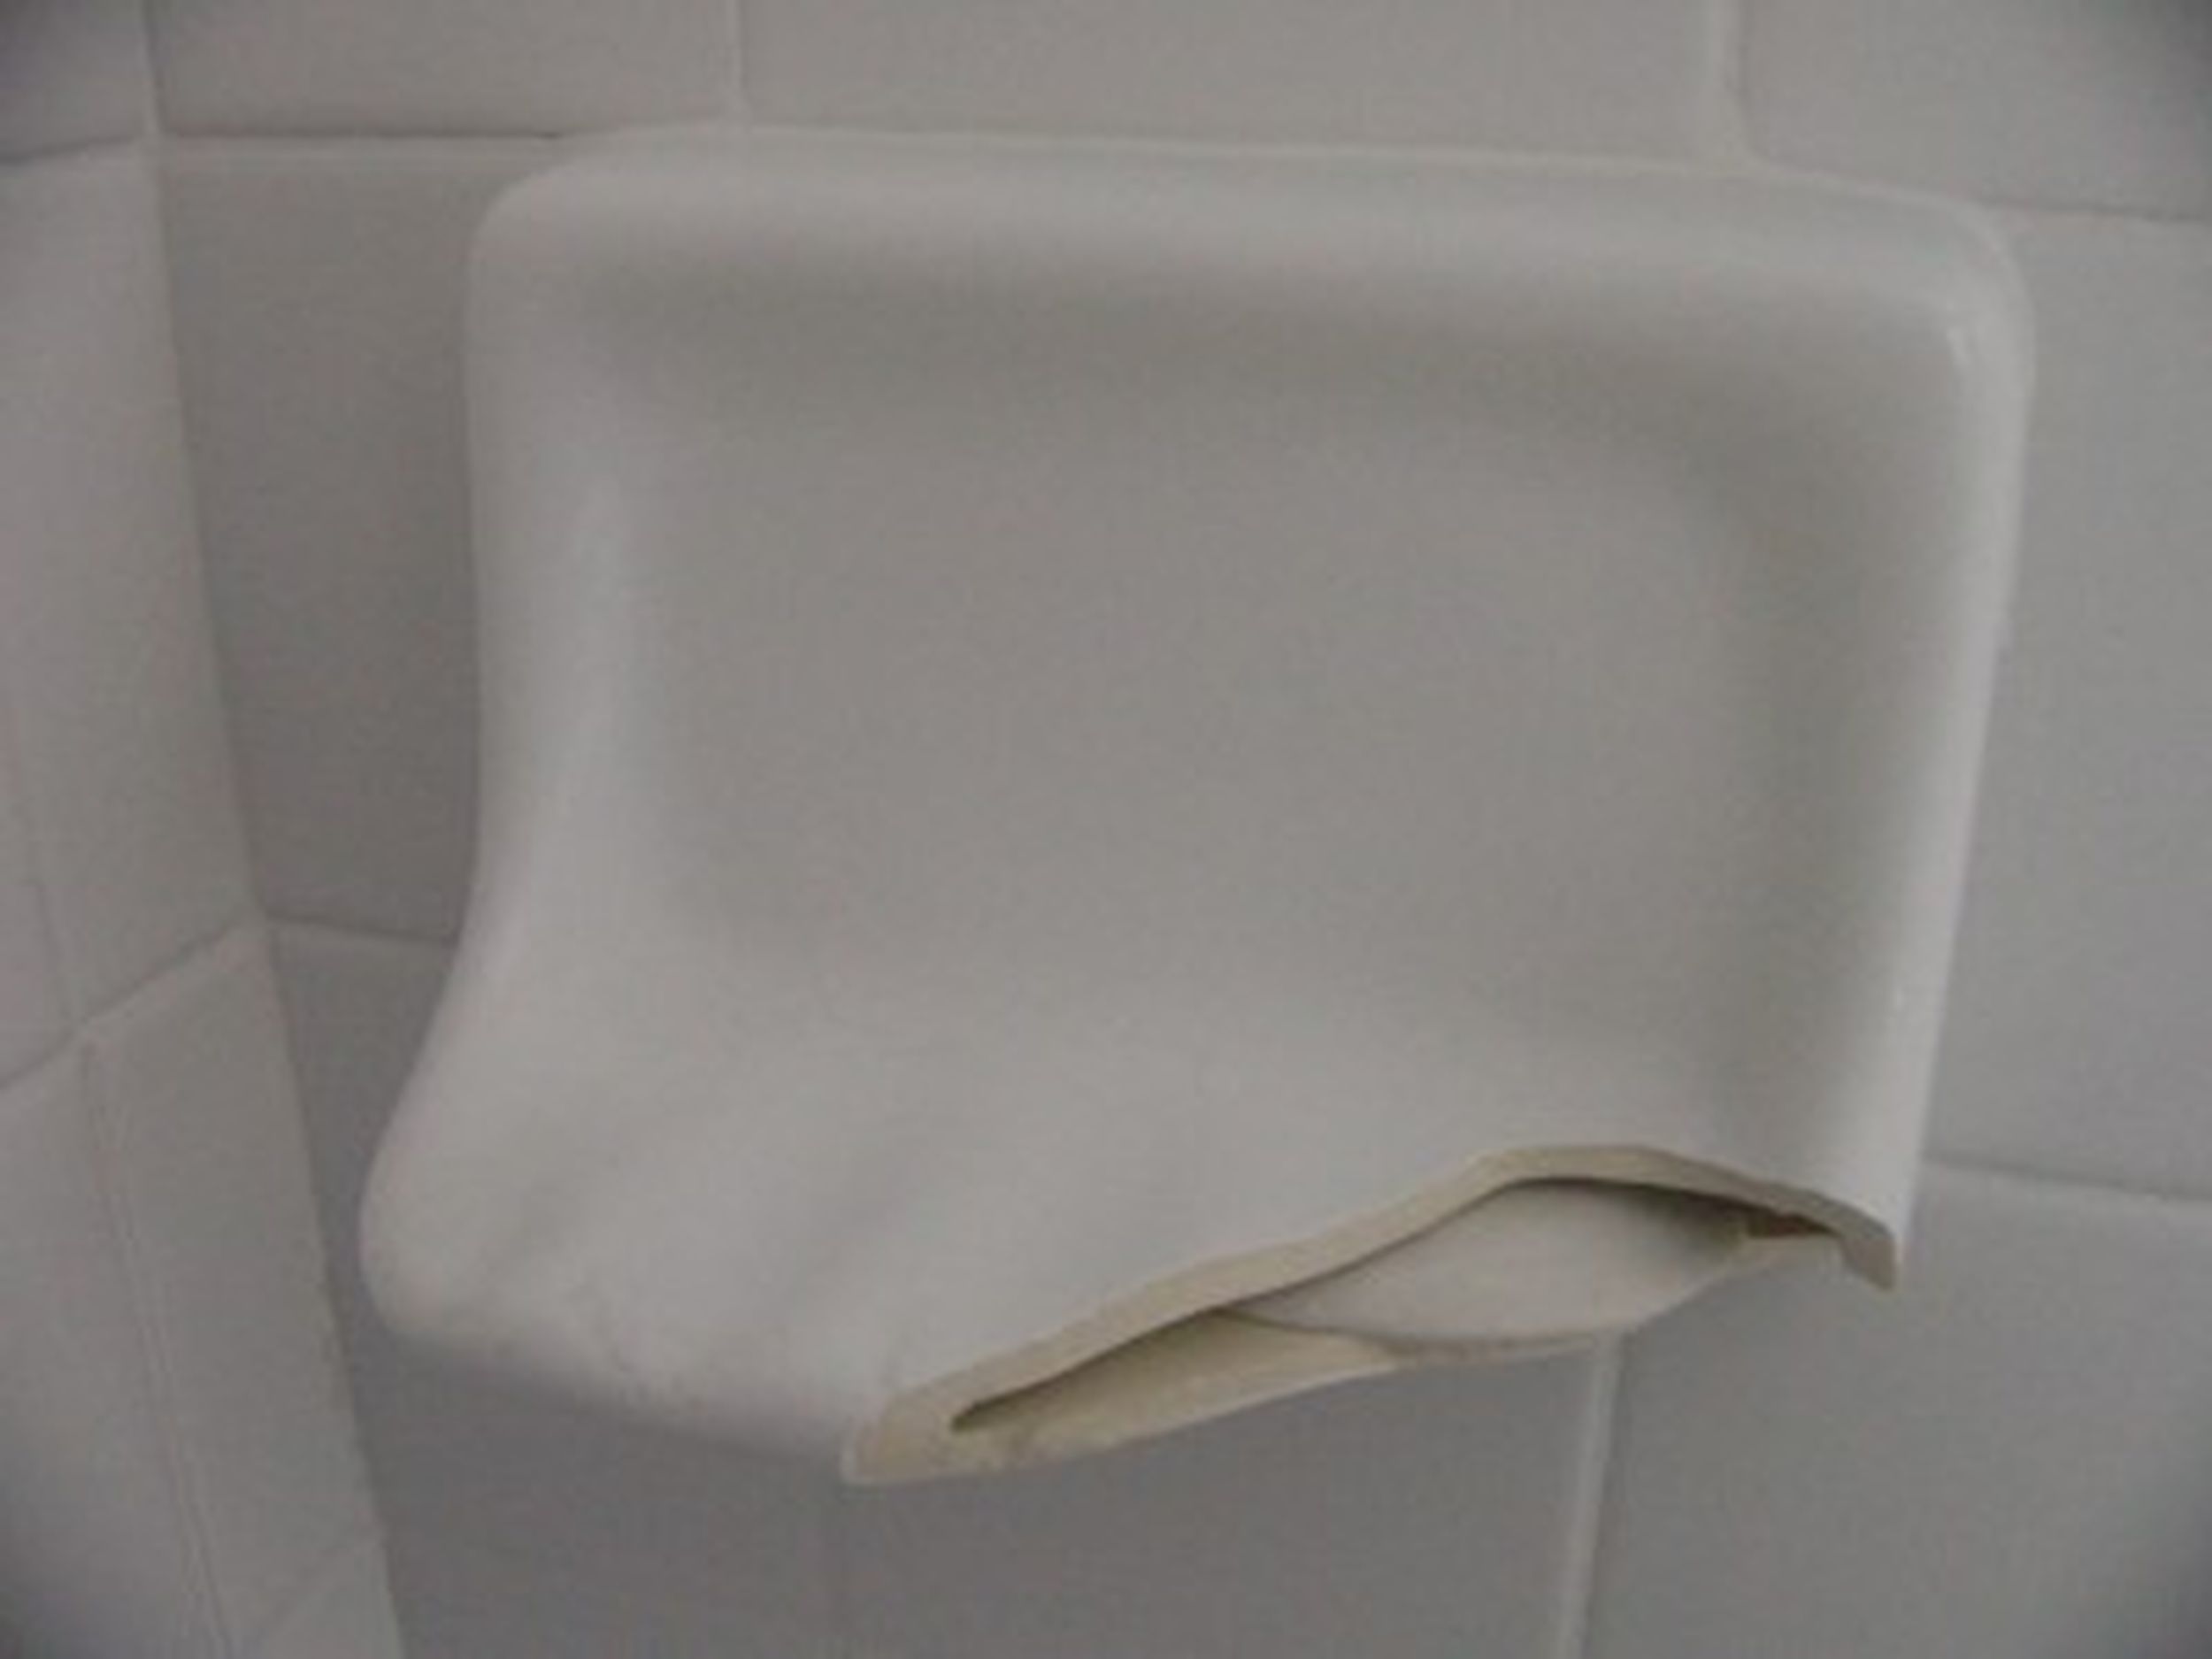 How to Install a Soap Dish on a Tile Wall